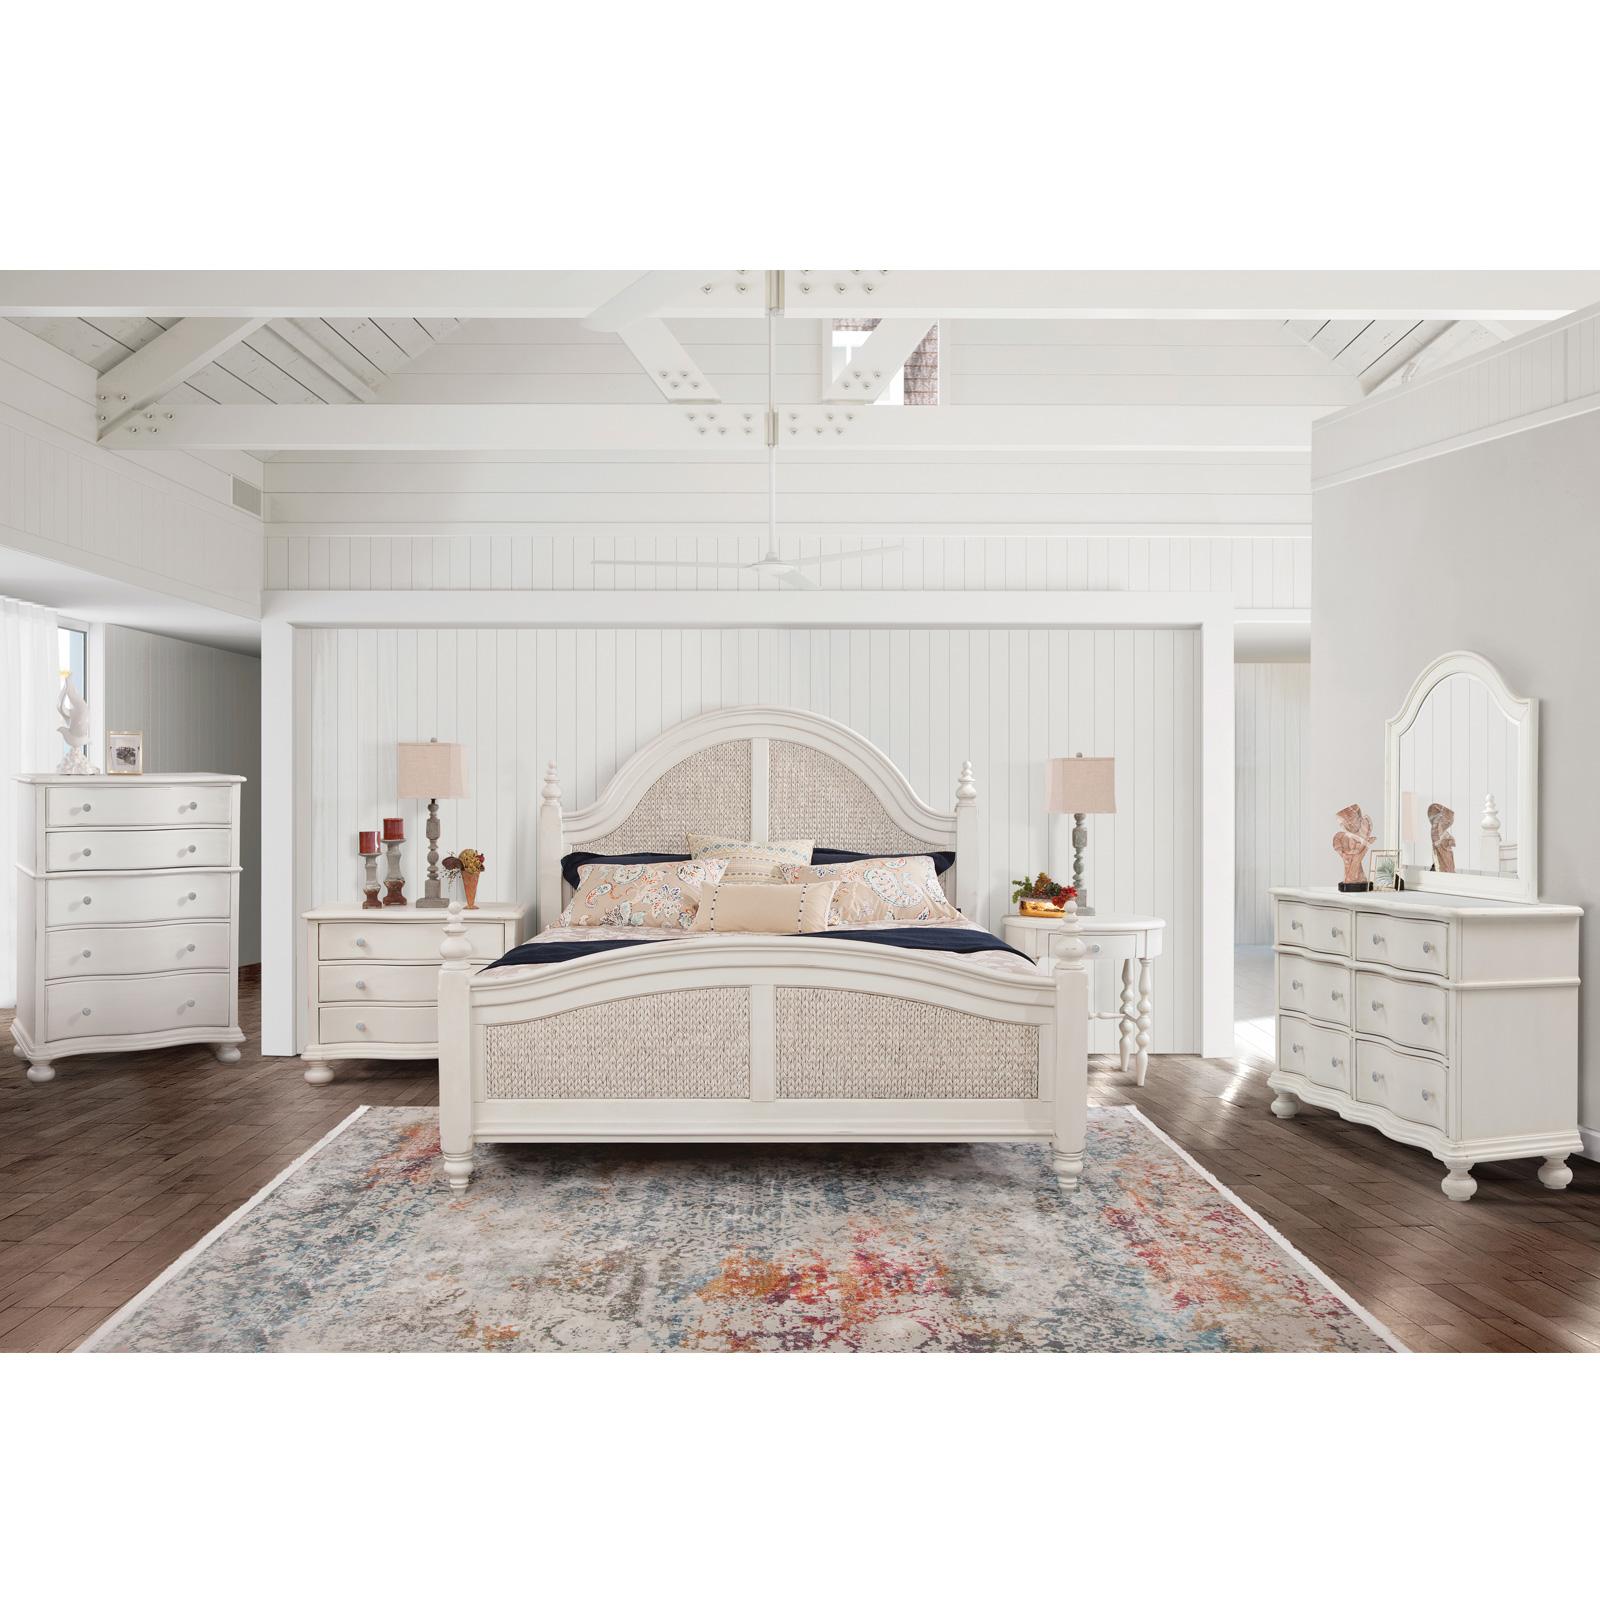 Youth, Traditional, Cottage Panel Bedroom Set Rodanthe 3910-50WOWO 3910-QWOWO-5PC in White 